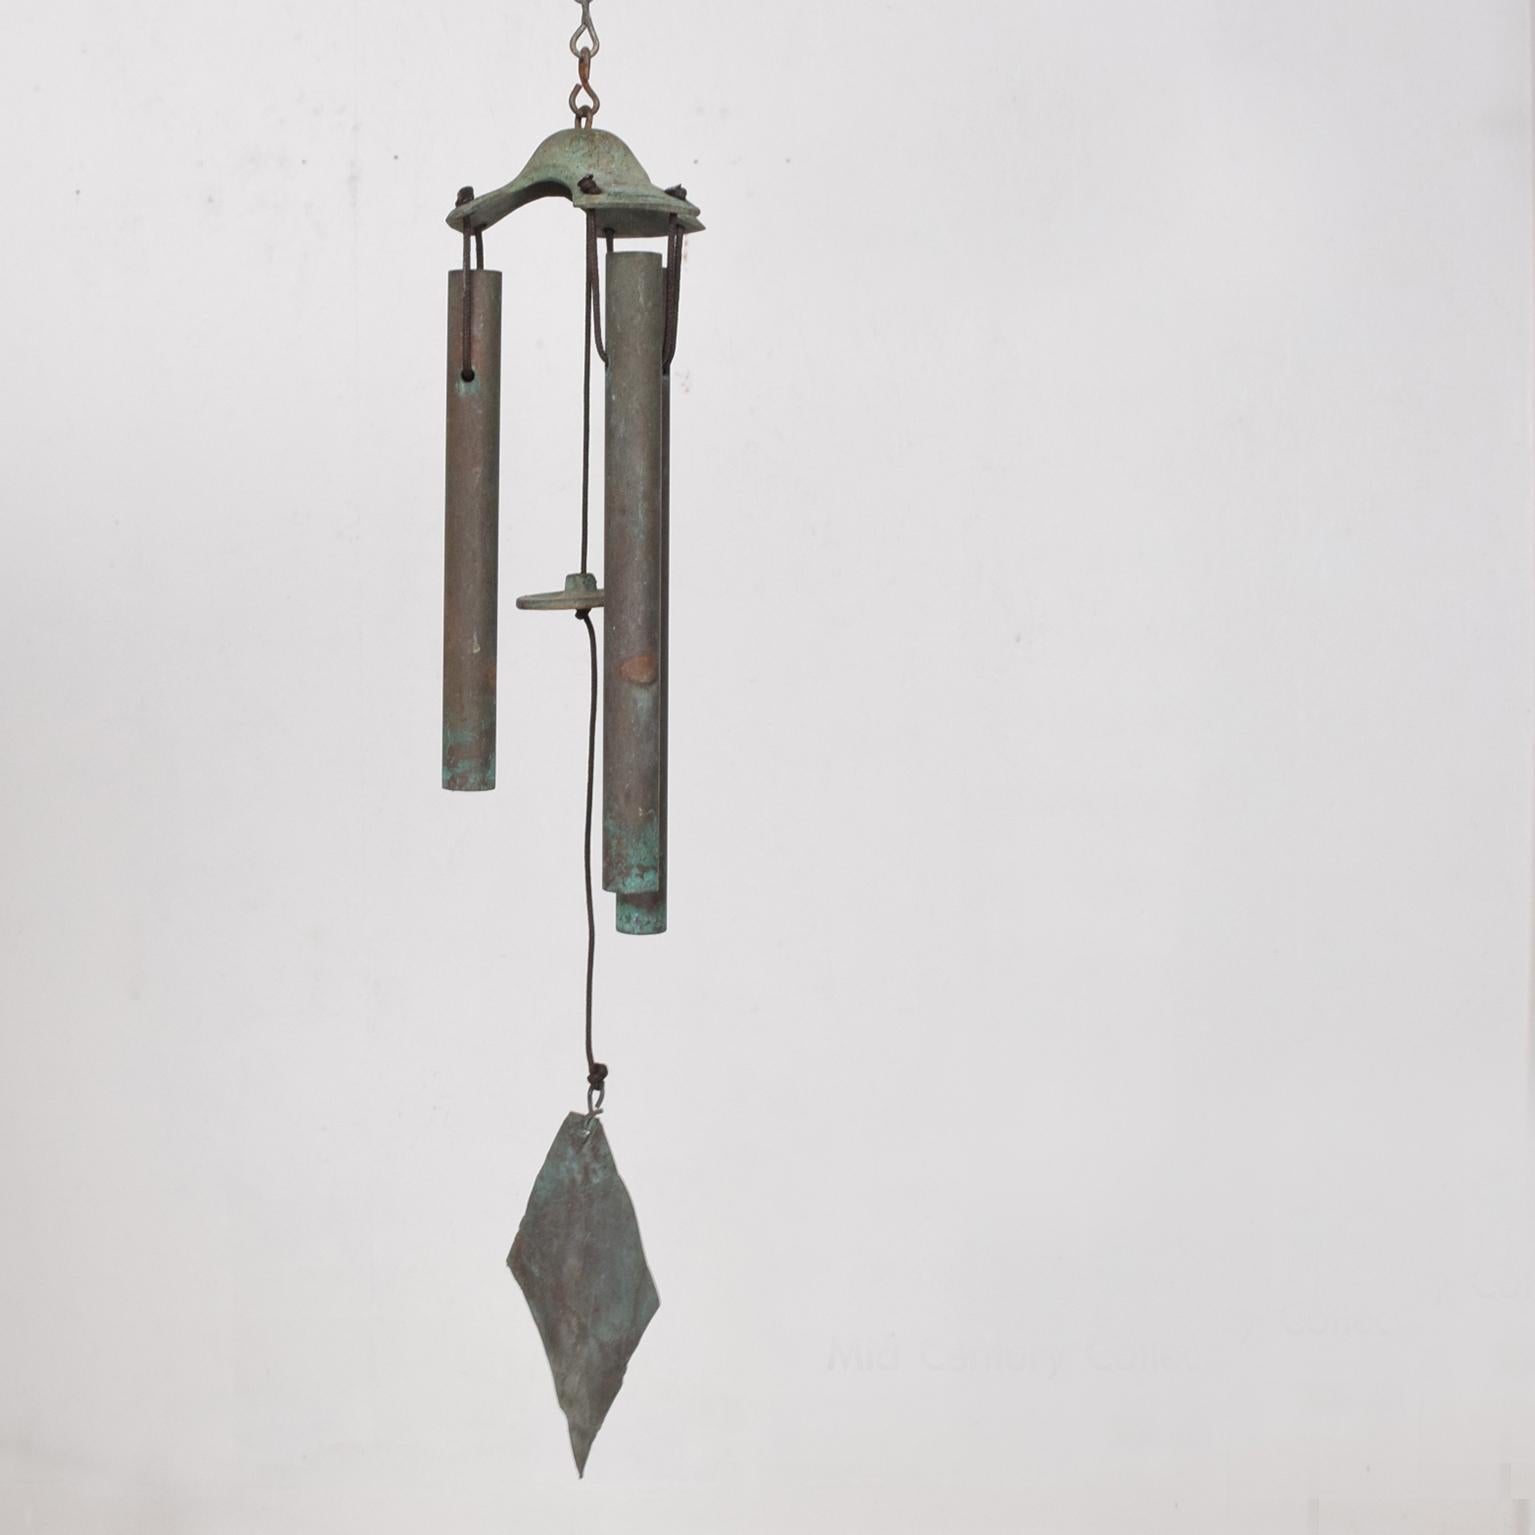 A Mid-Century Modern wind chime in patinated bronze, 
circa 1960s.
Measures: 27